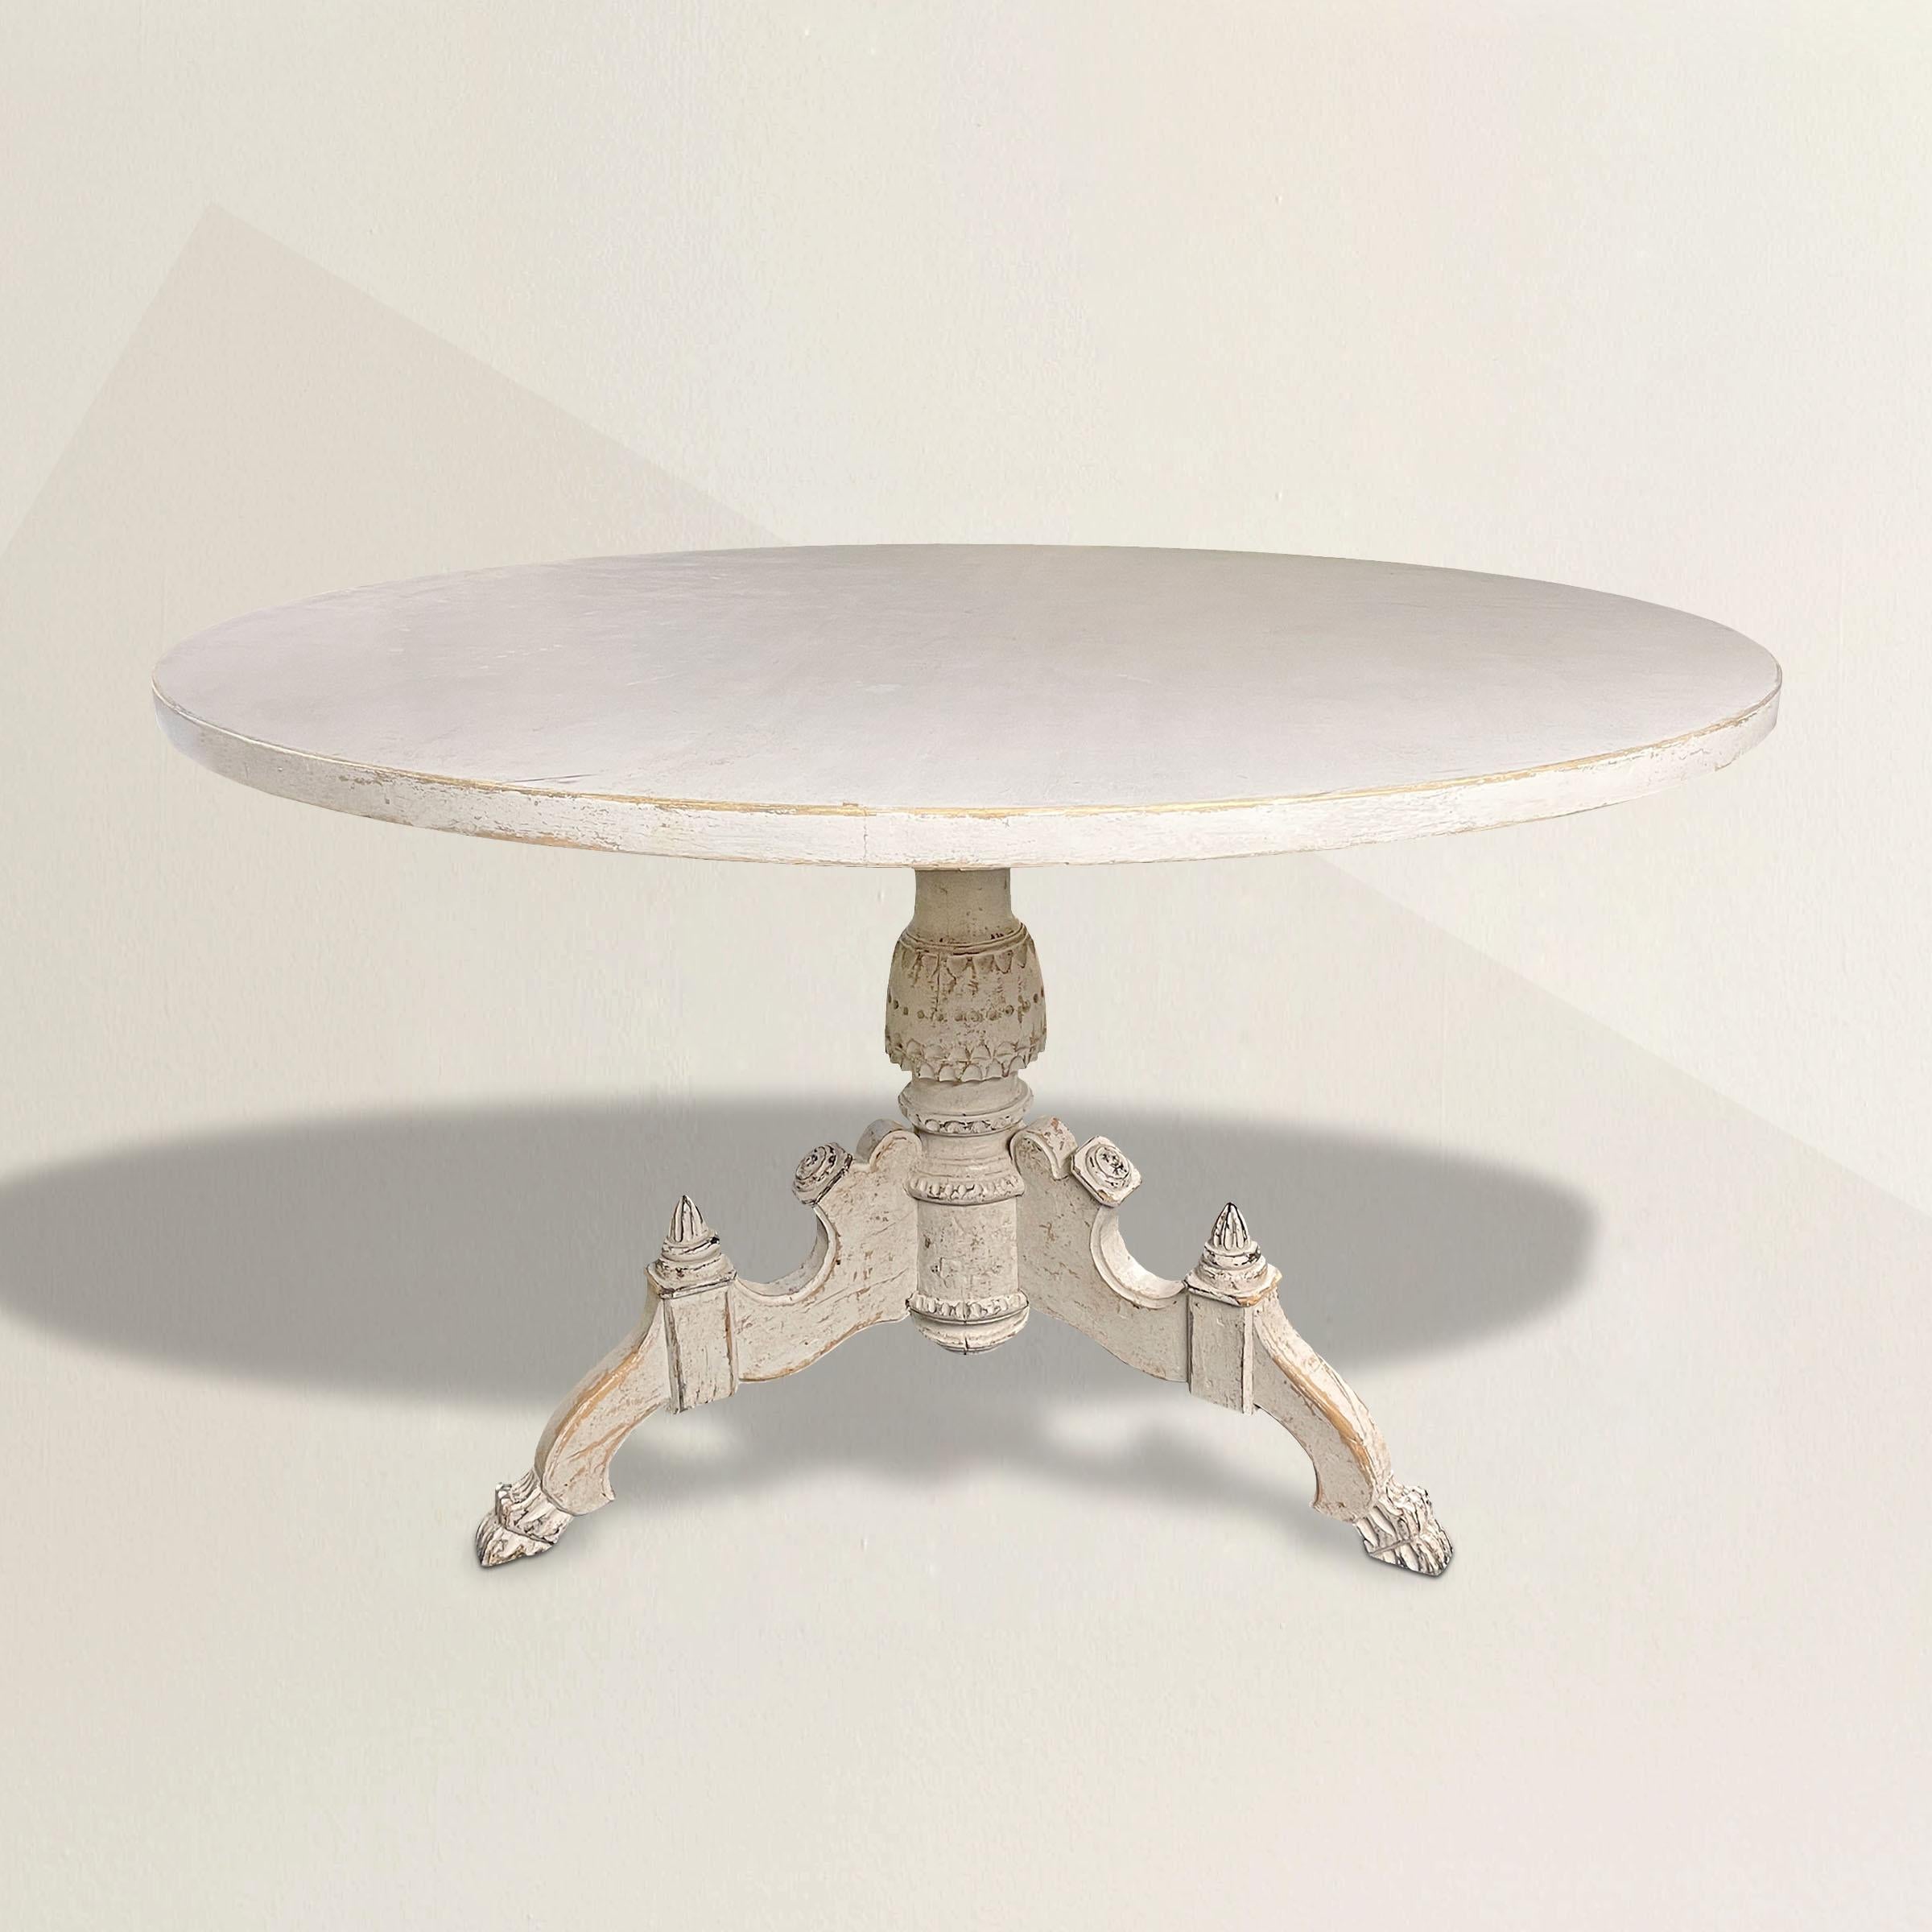 A stunning early 19th century Swedish round dining table with an ornately chip-carved pedestal supported by three legs, each with acorn finials, and ending in stylized lion paw feet, and retaining its original white painted surface.